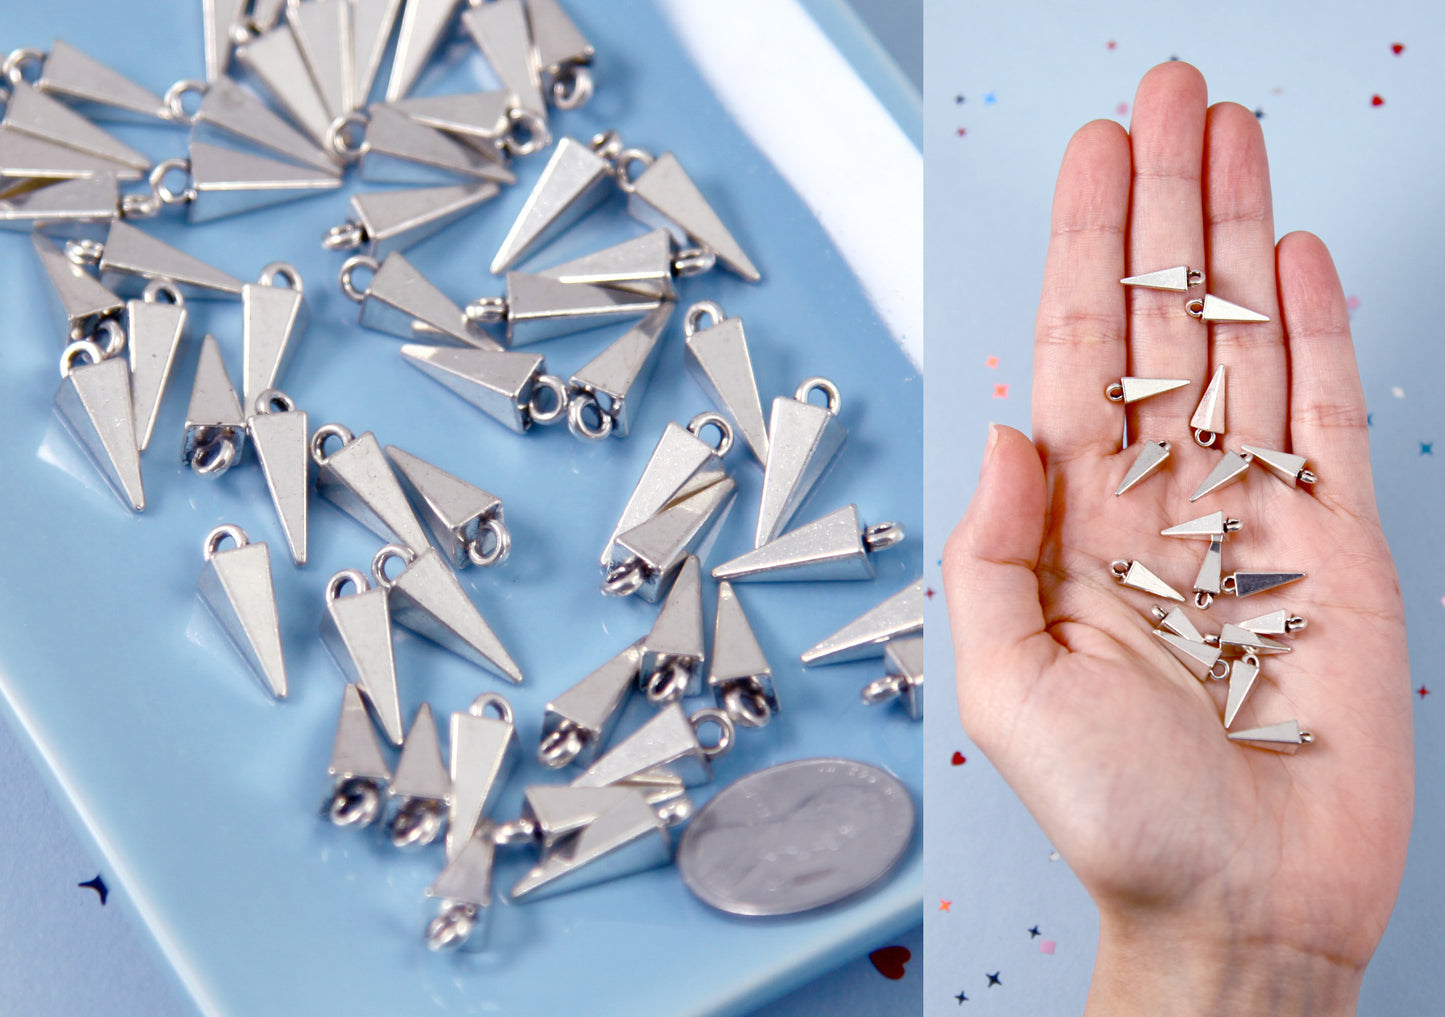 Spike Charms - 20 pc set - 16mm Triangular Spiky Charm - Silver Color - With Holes to Easily make Jewelry